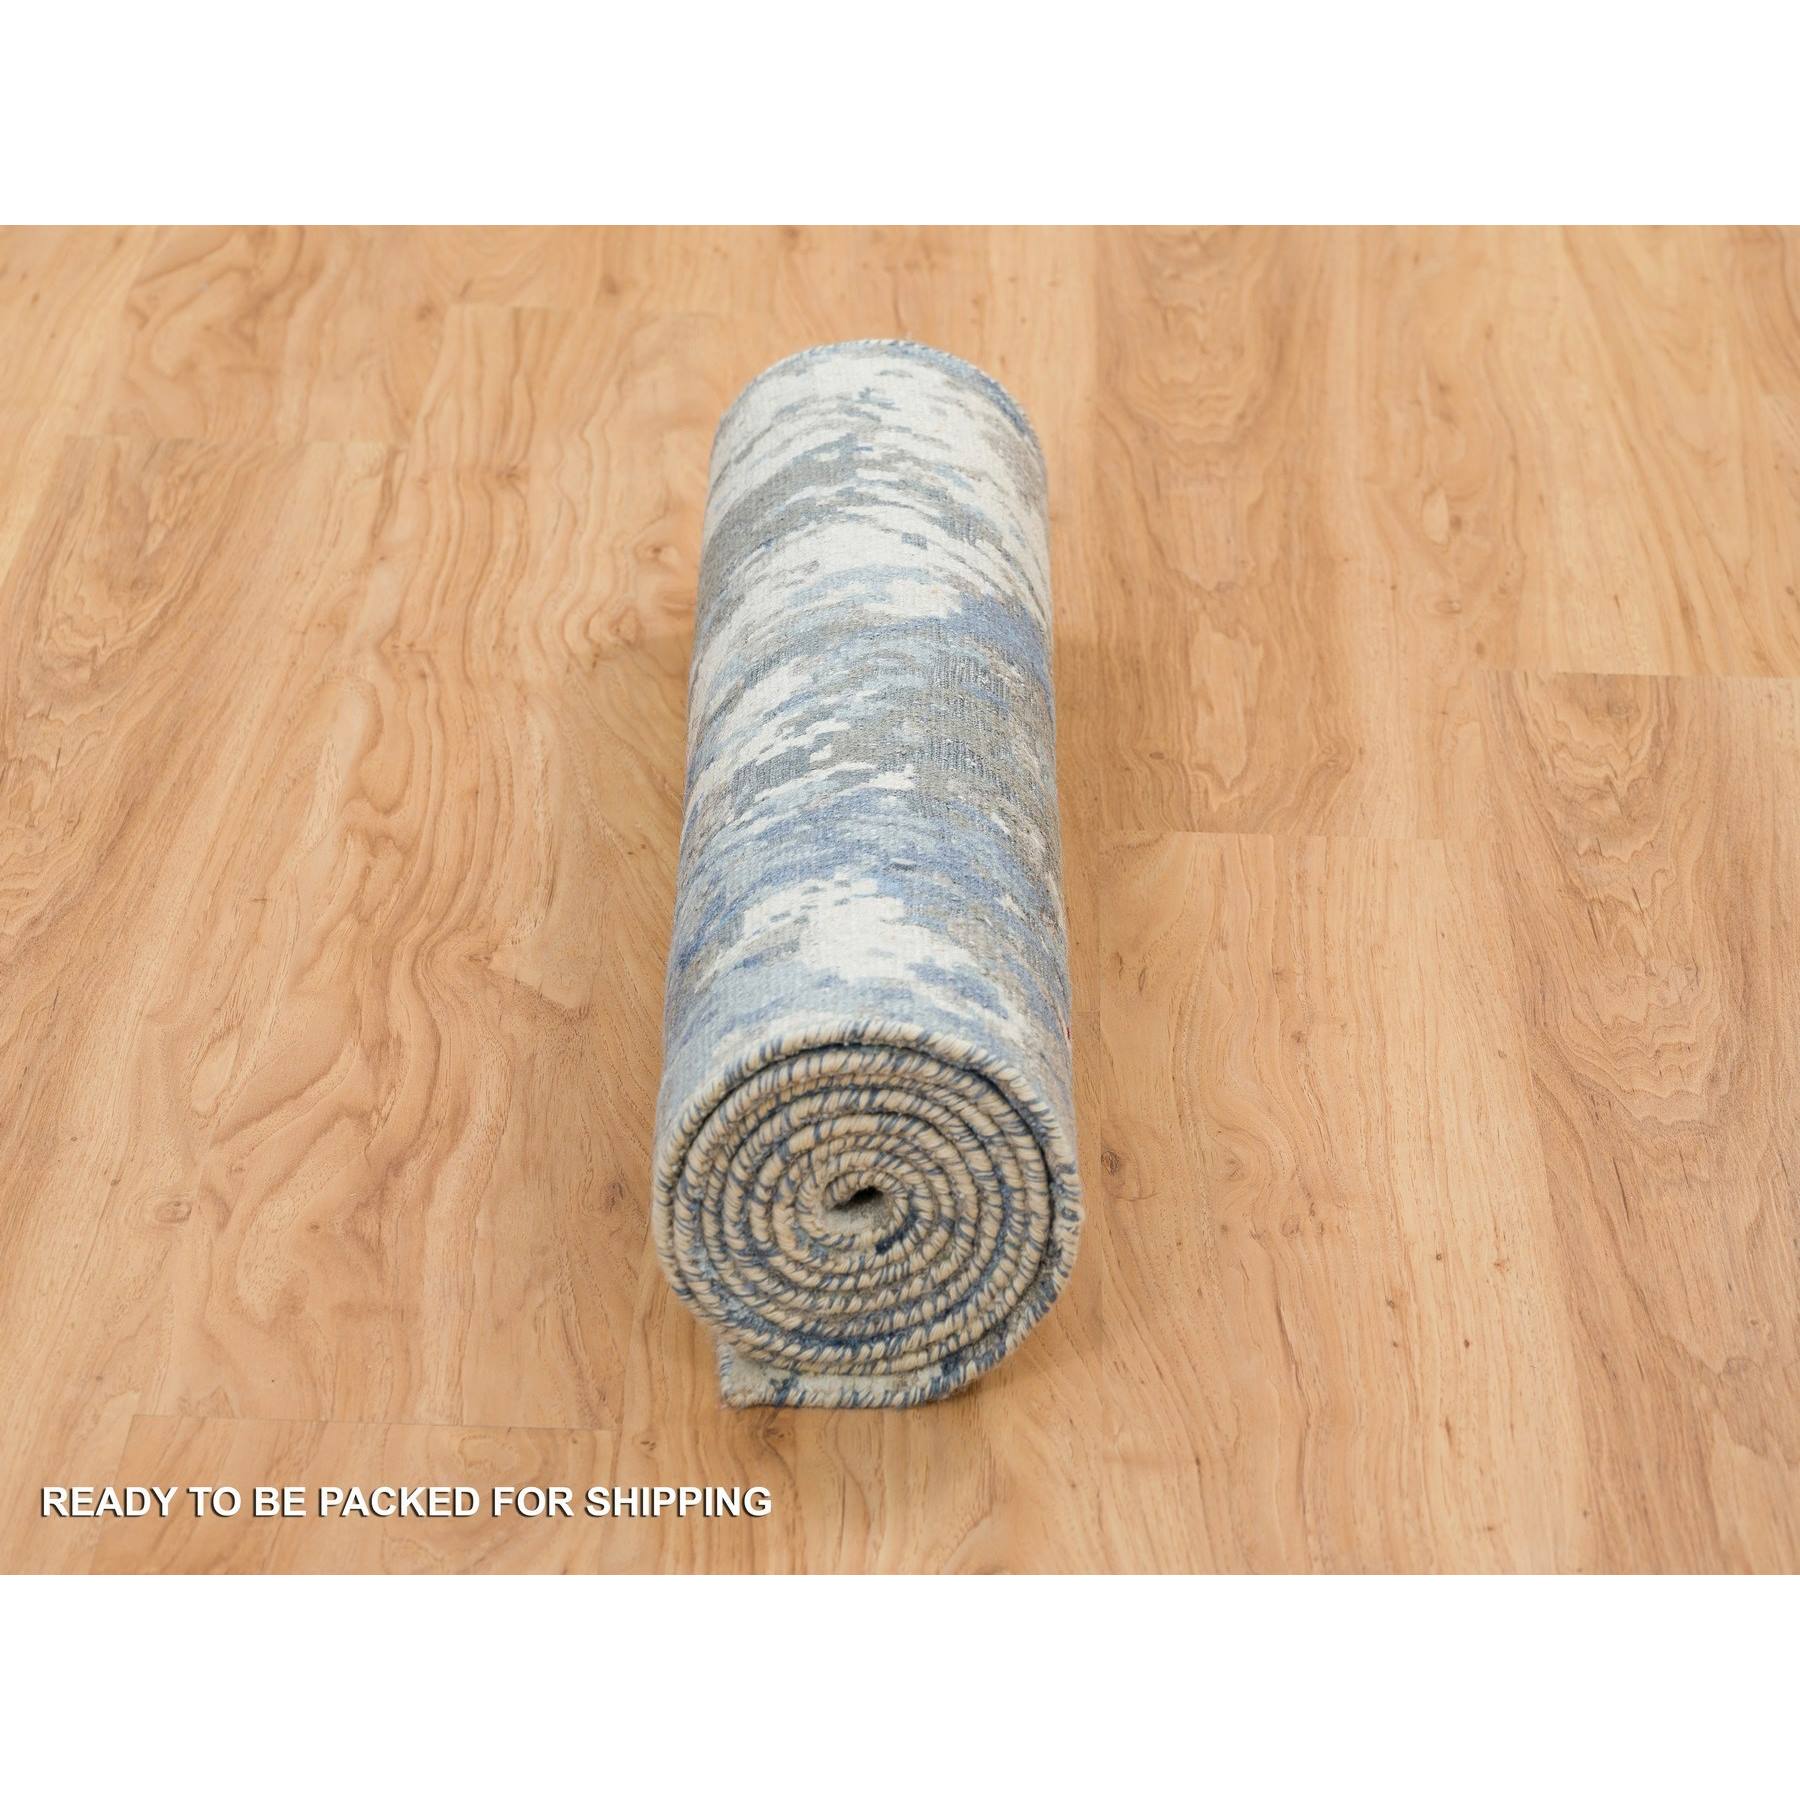 Modern-and-Contemporary-Hand-Knotted-Rug-326080